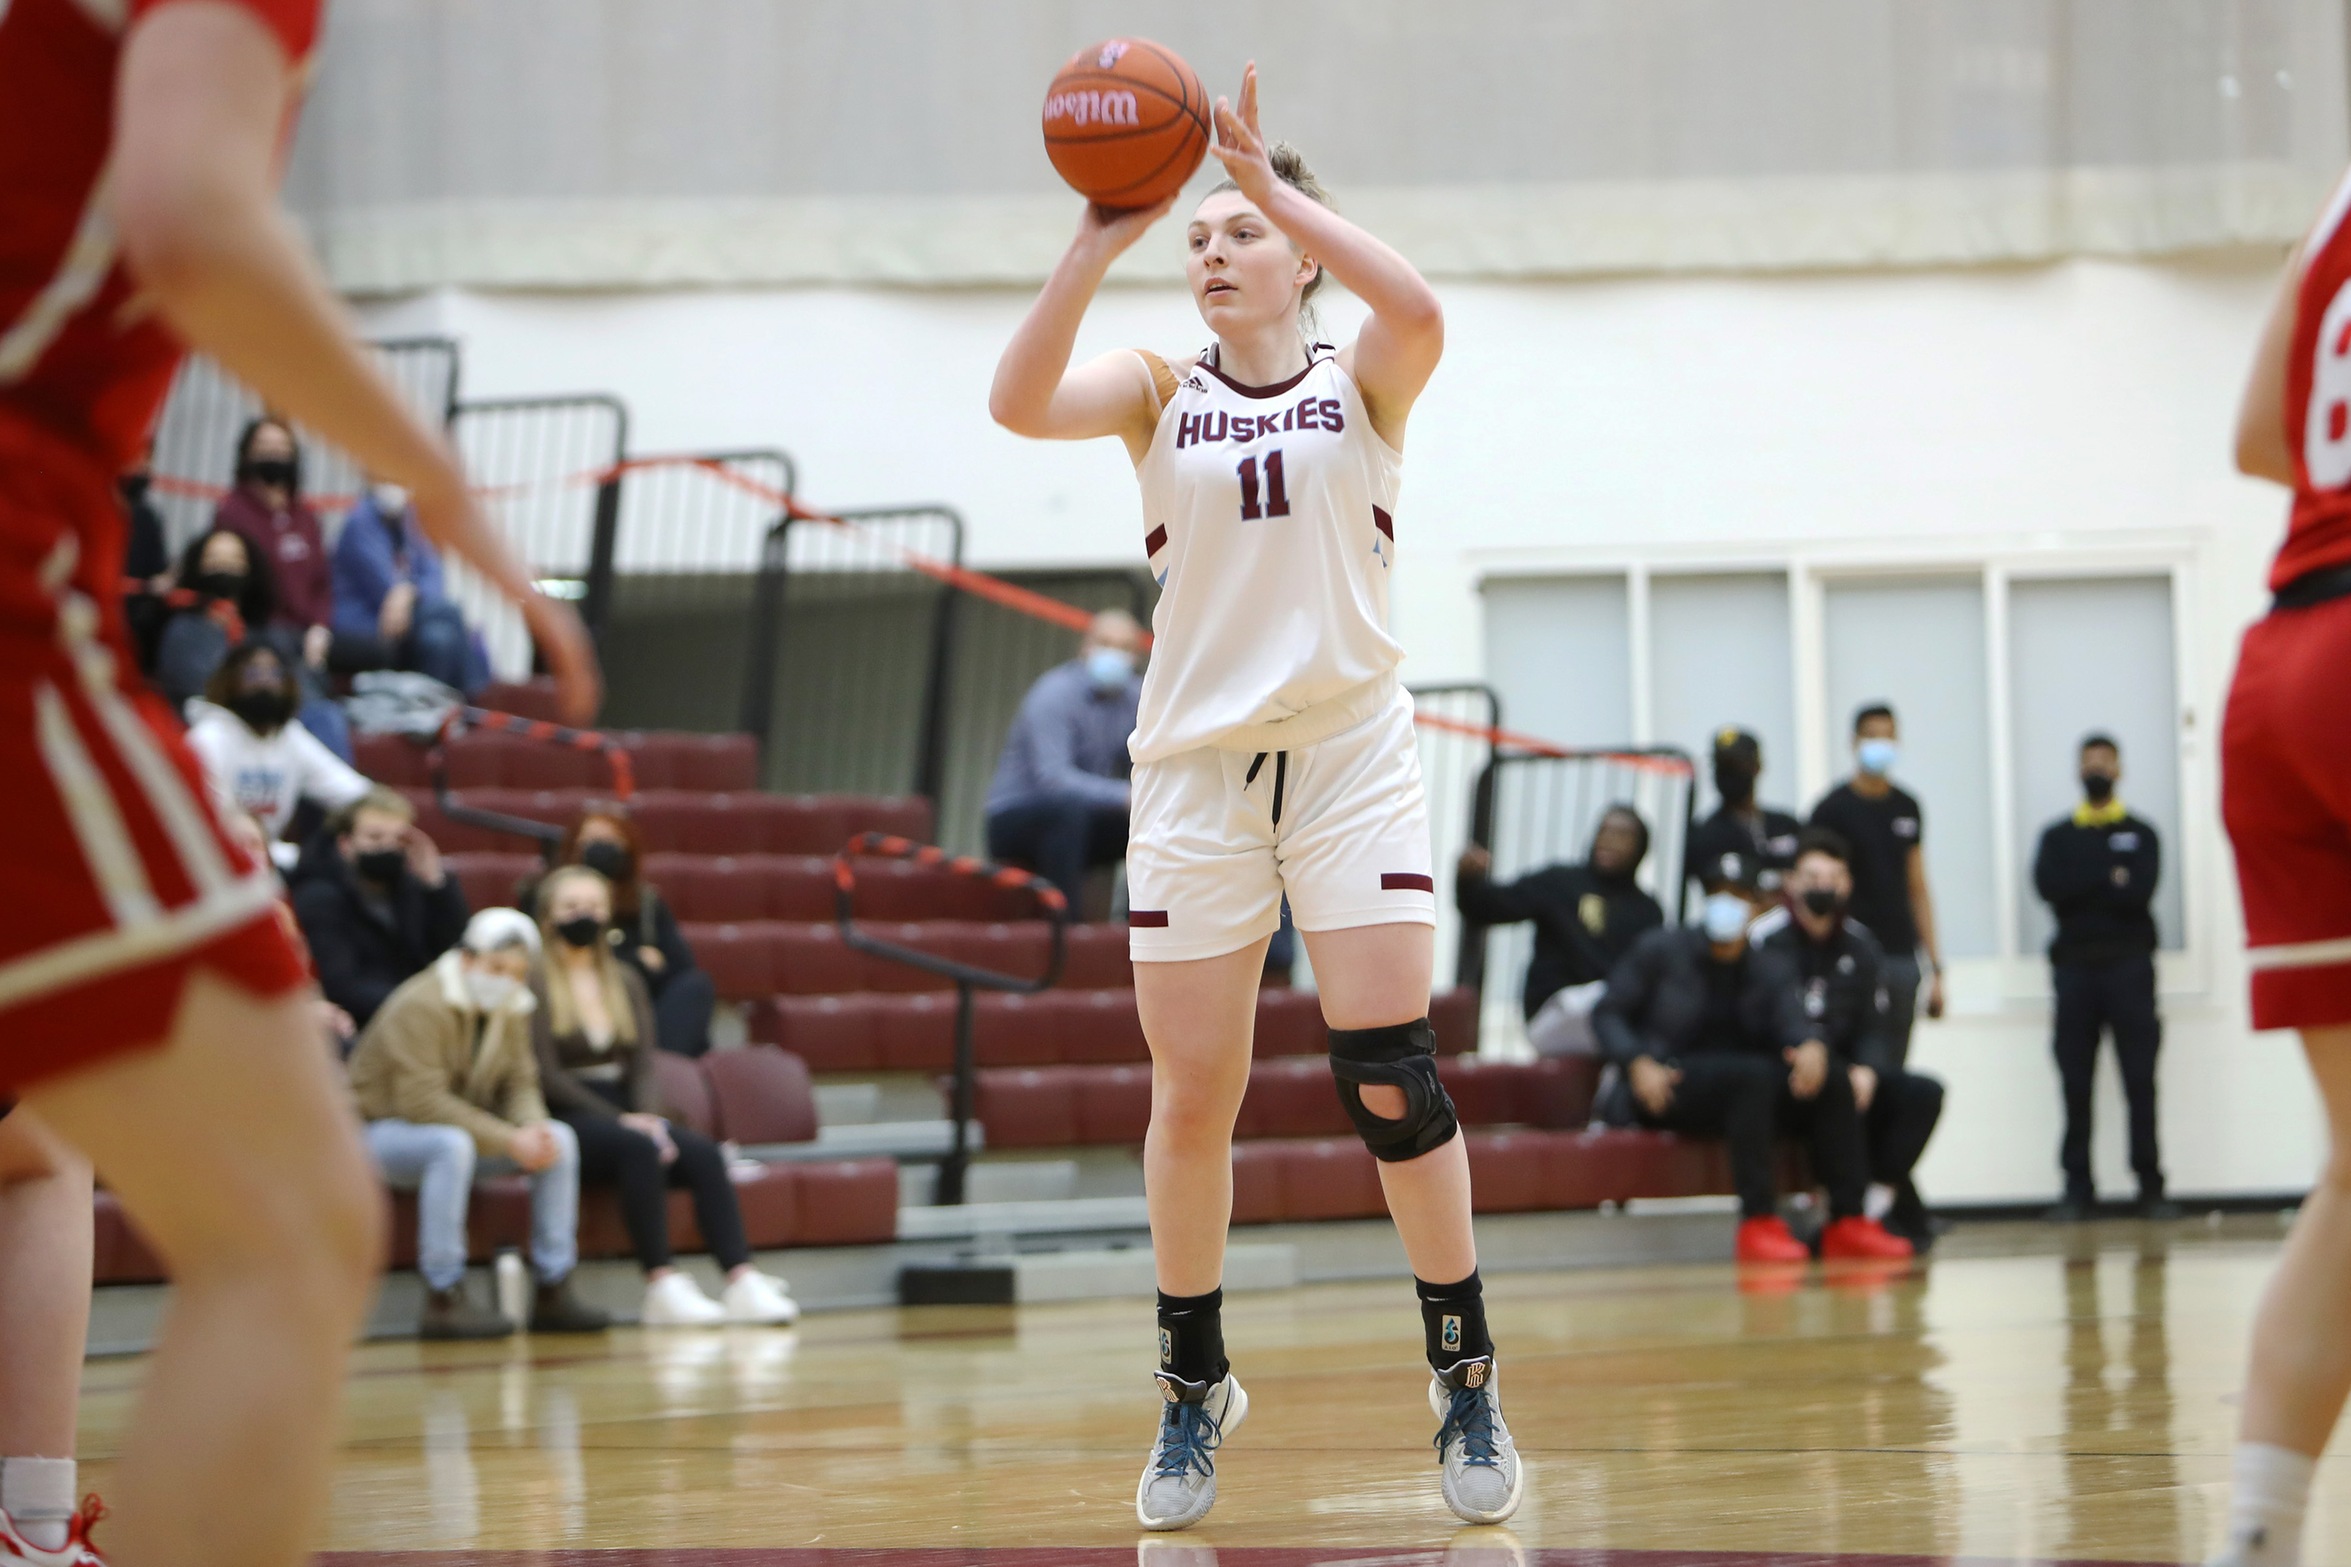 Huskies forward Marlo Steenbakkers was named Subway Player of the Game with 17 points in the Huskies 82-59 win over the Memorial Sea-Hawks on Saturday, March 5, 2022. (Photo by Nick Pearce / SMU Huskies Athletics)